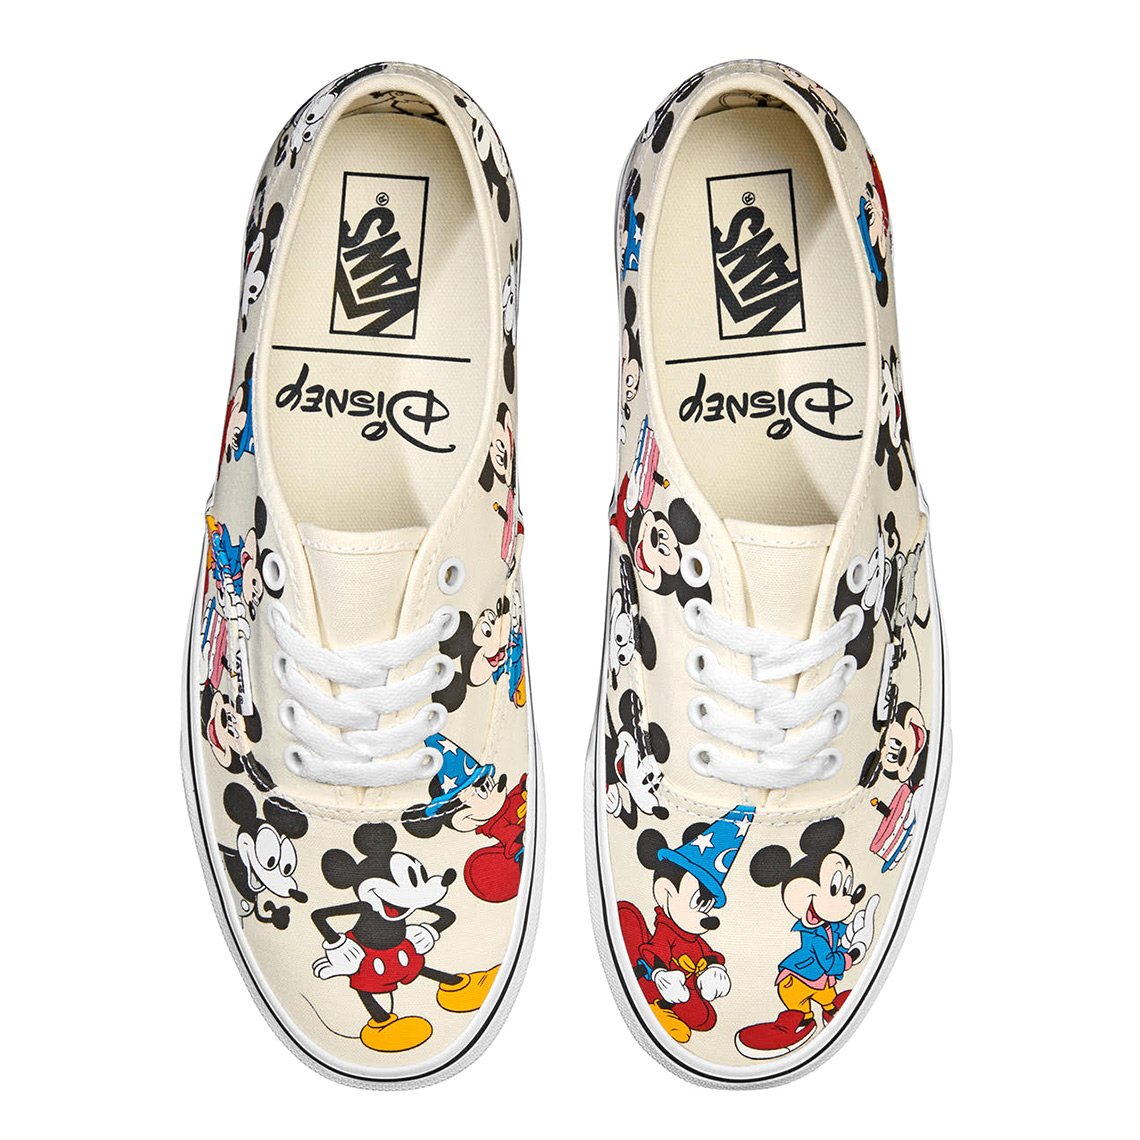 vans mickey mouse limited edition